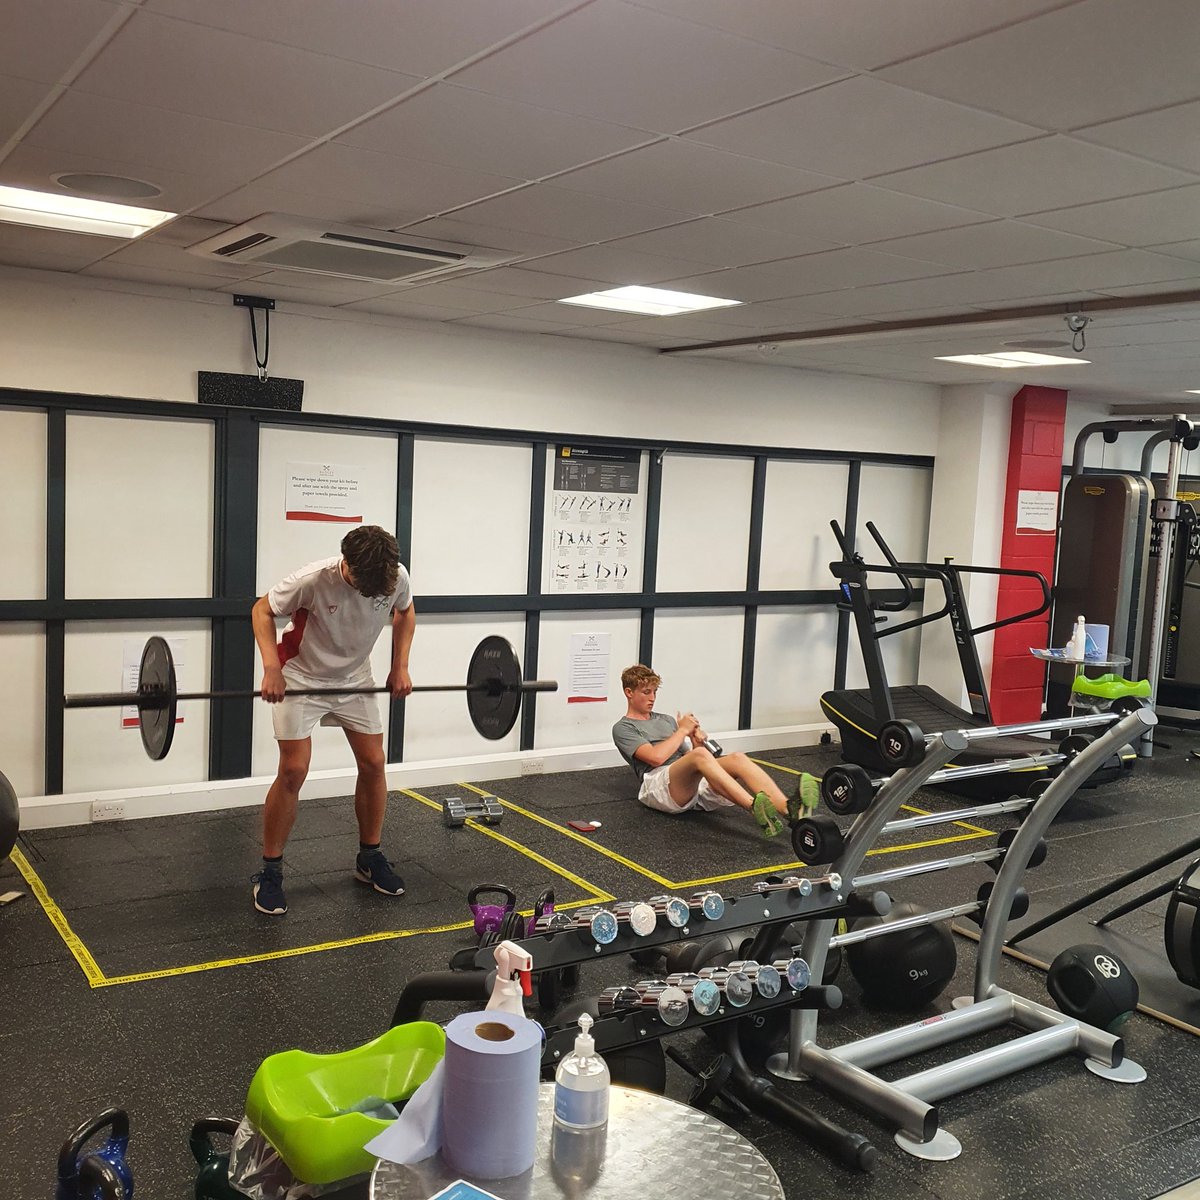 Students enjoying a session in the Fitness Suite! 

#radleysportscentre #radleypeople